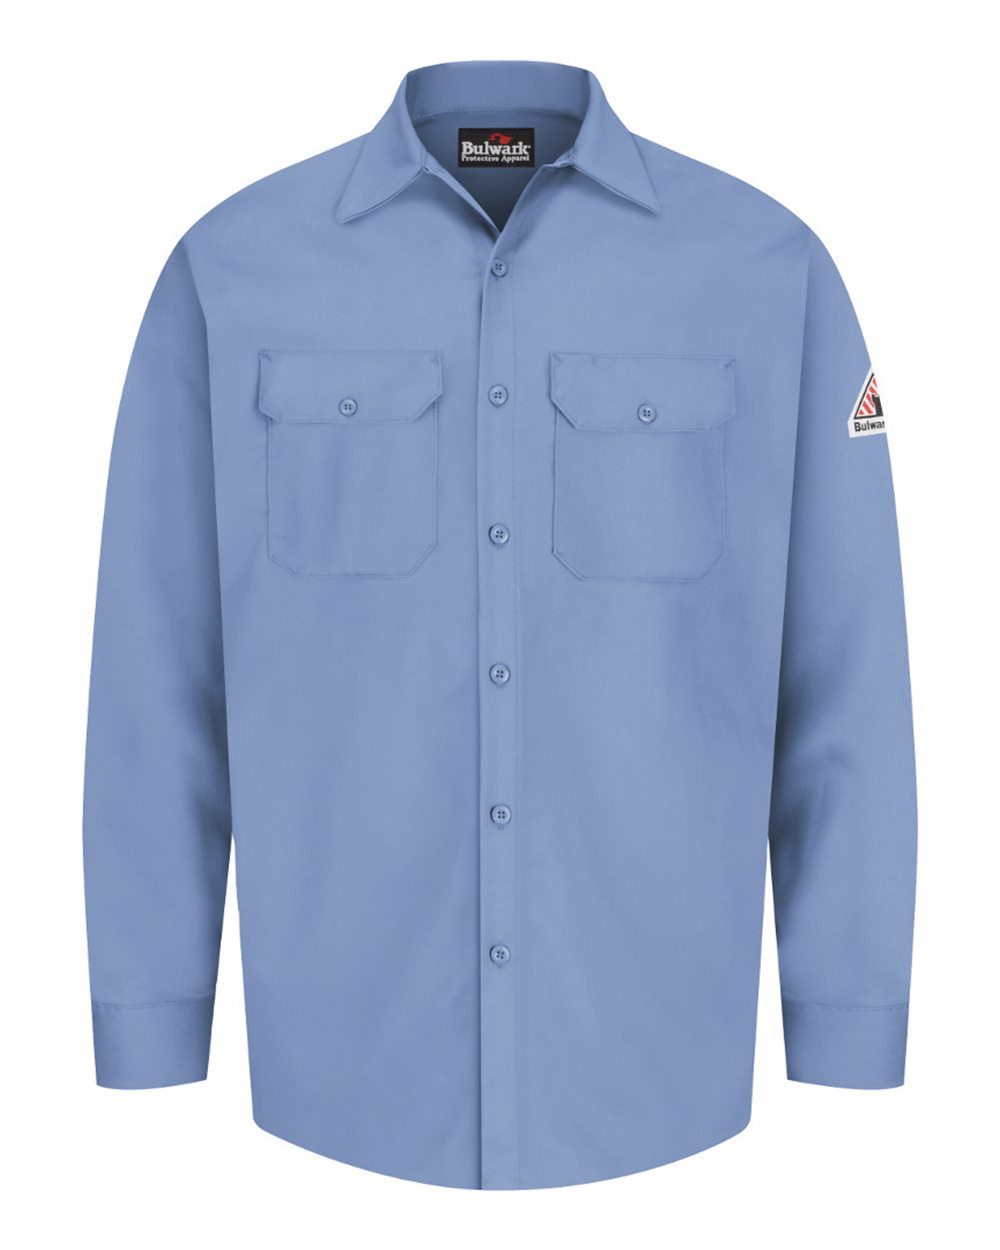 Bulwark Flame Resistant Excel Work Shirt Size up to 3XL - image 3 of 4